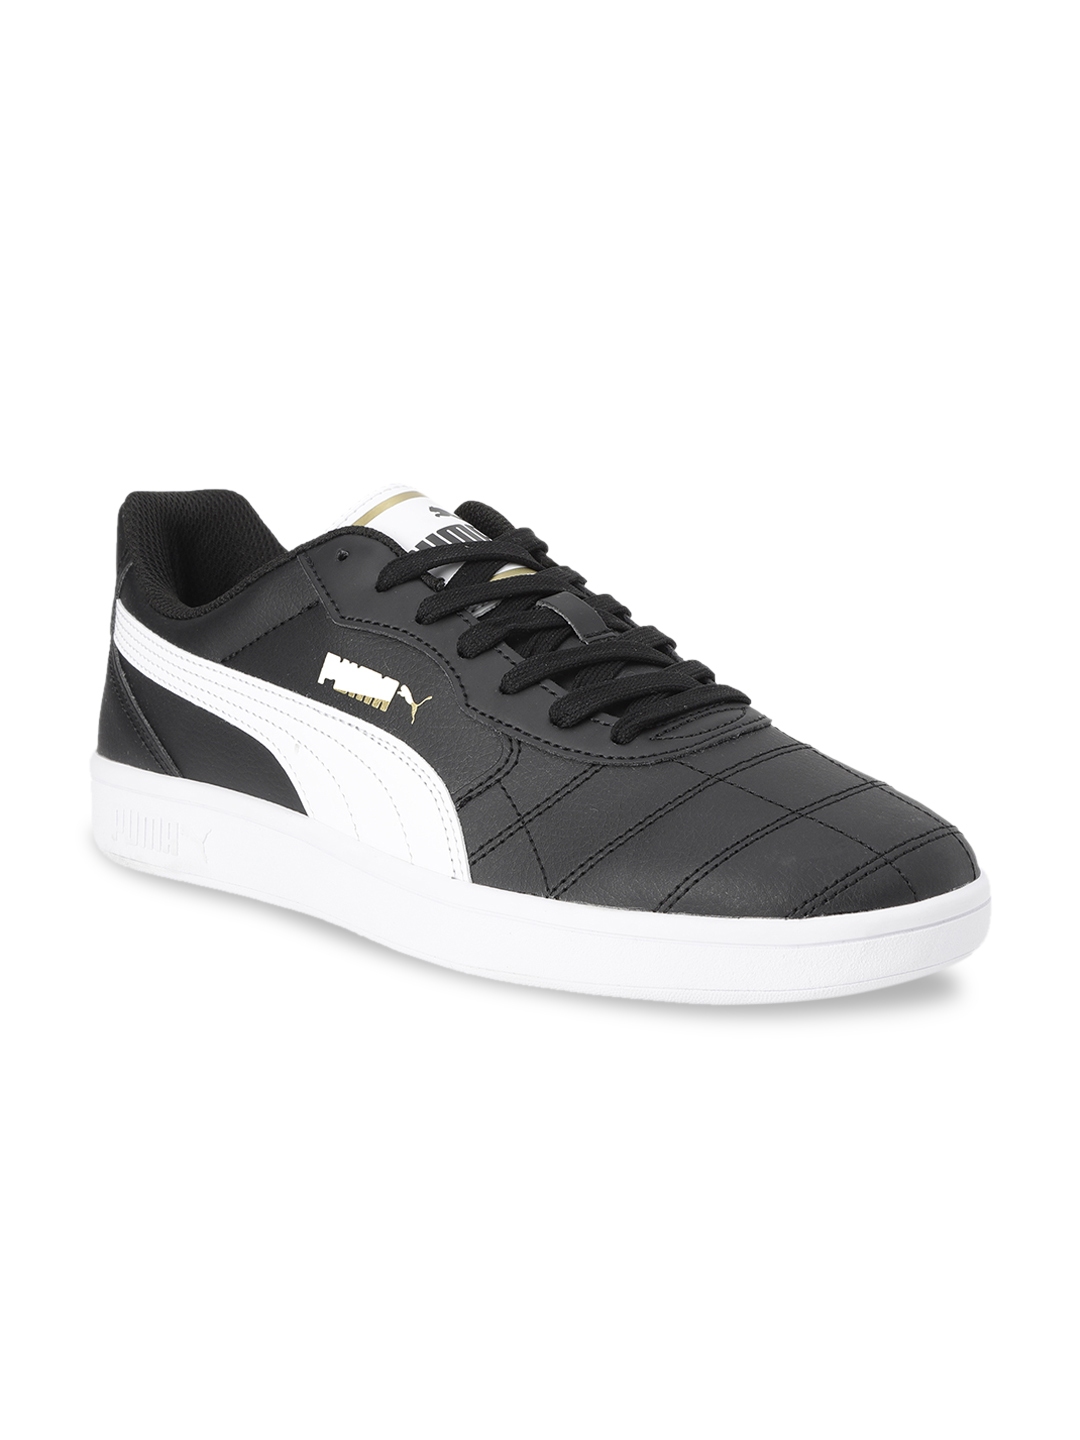 Buy Puma Unisex Black Astro Kick SL Sneakers - Casual Shoes for Unisex ...